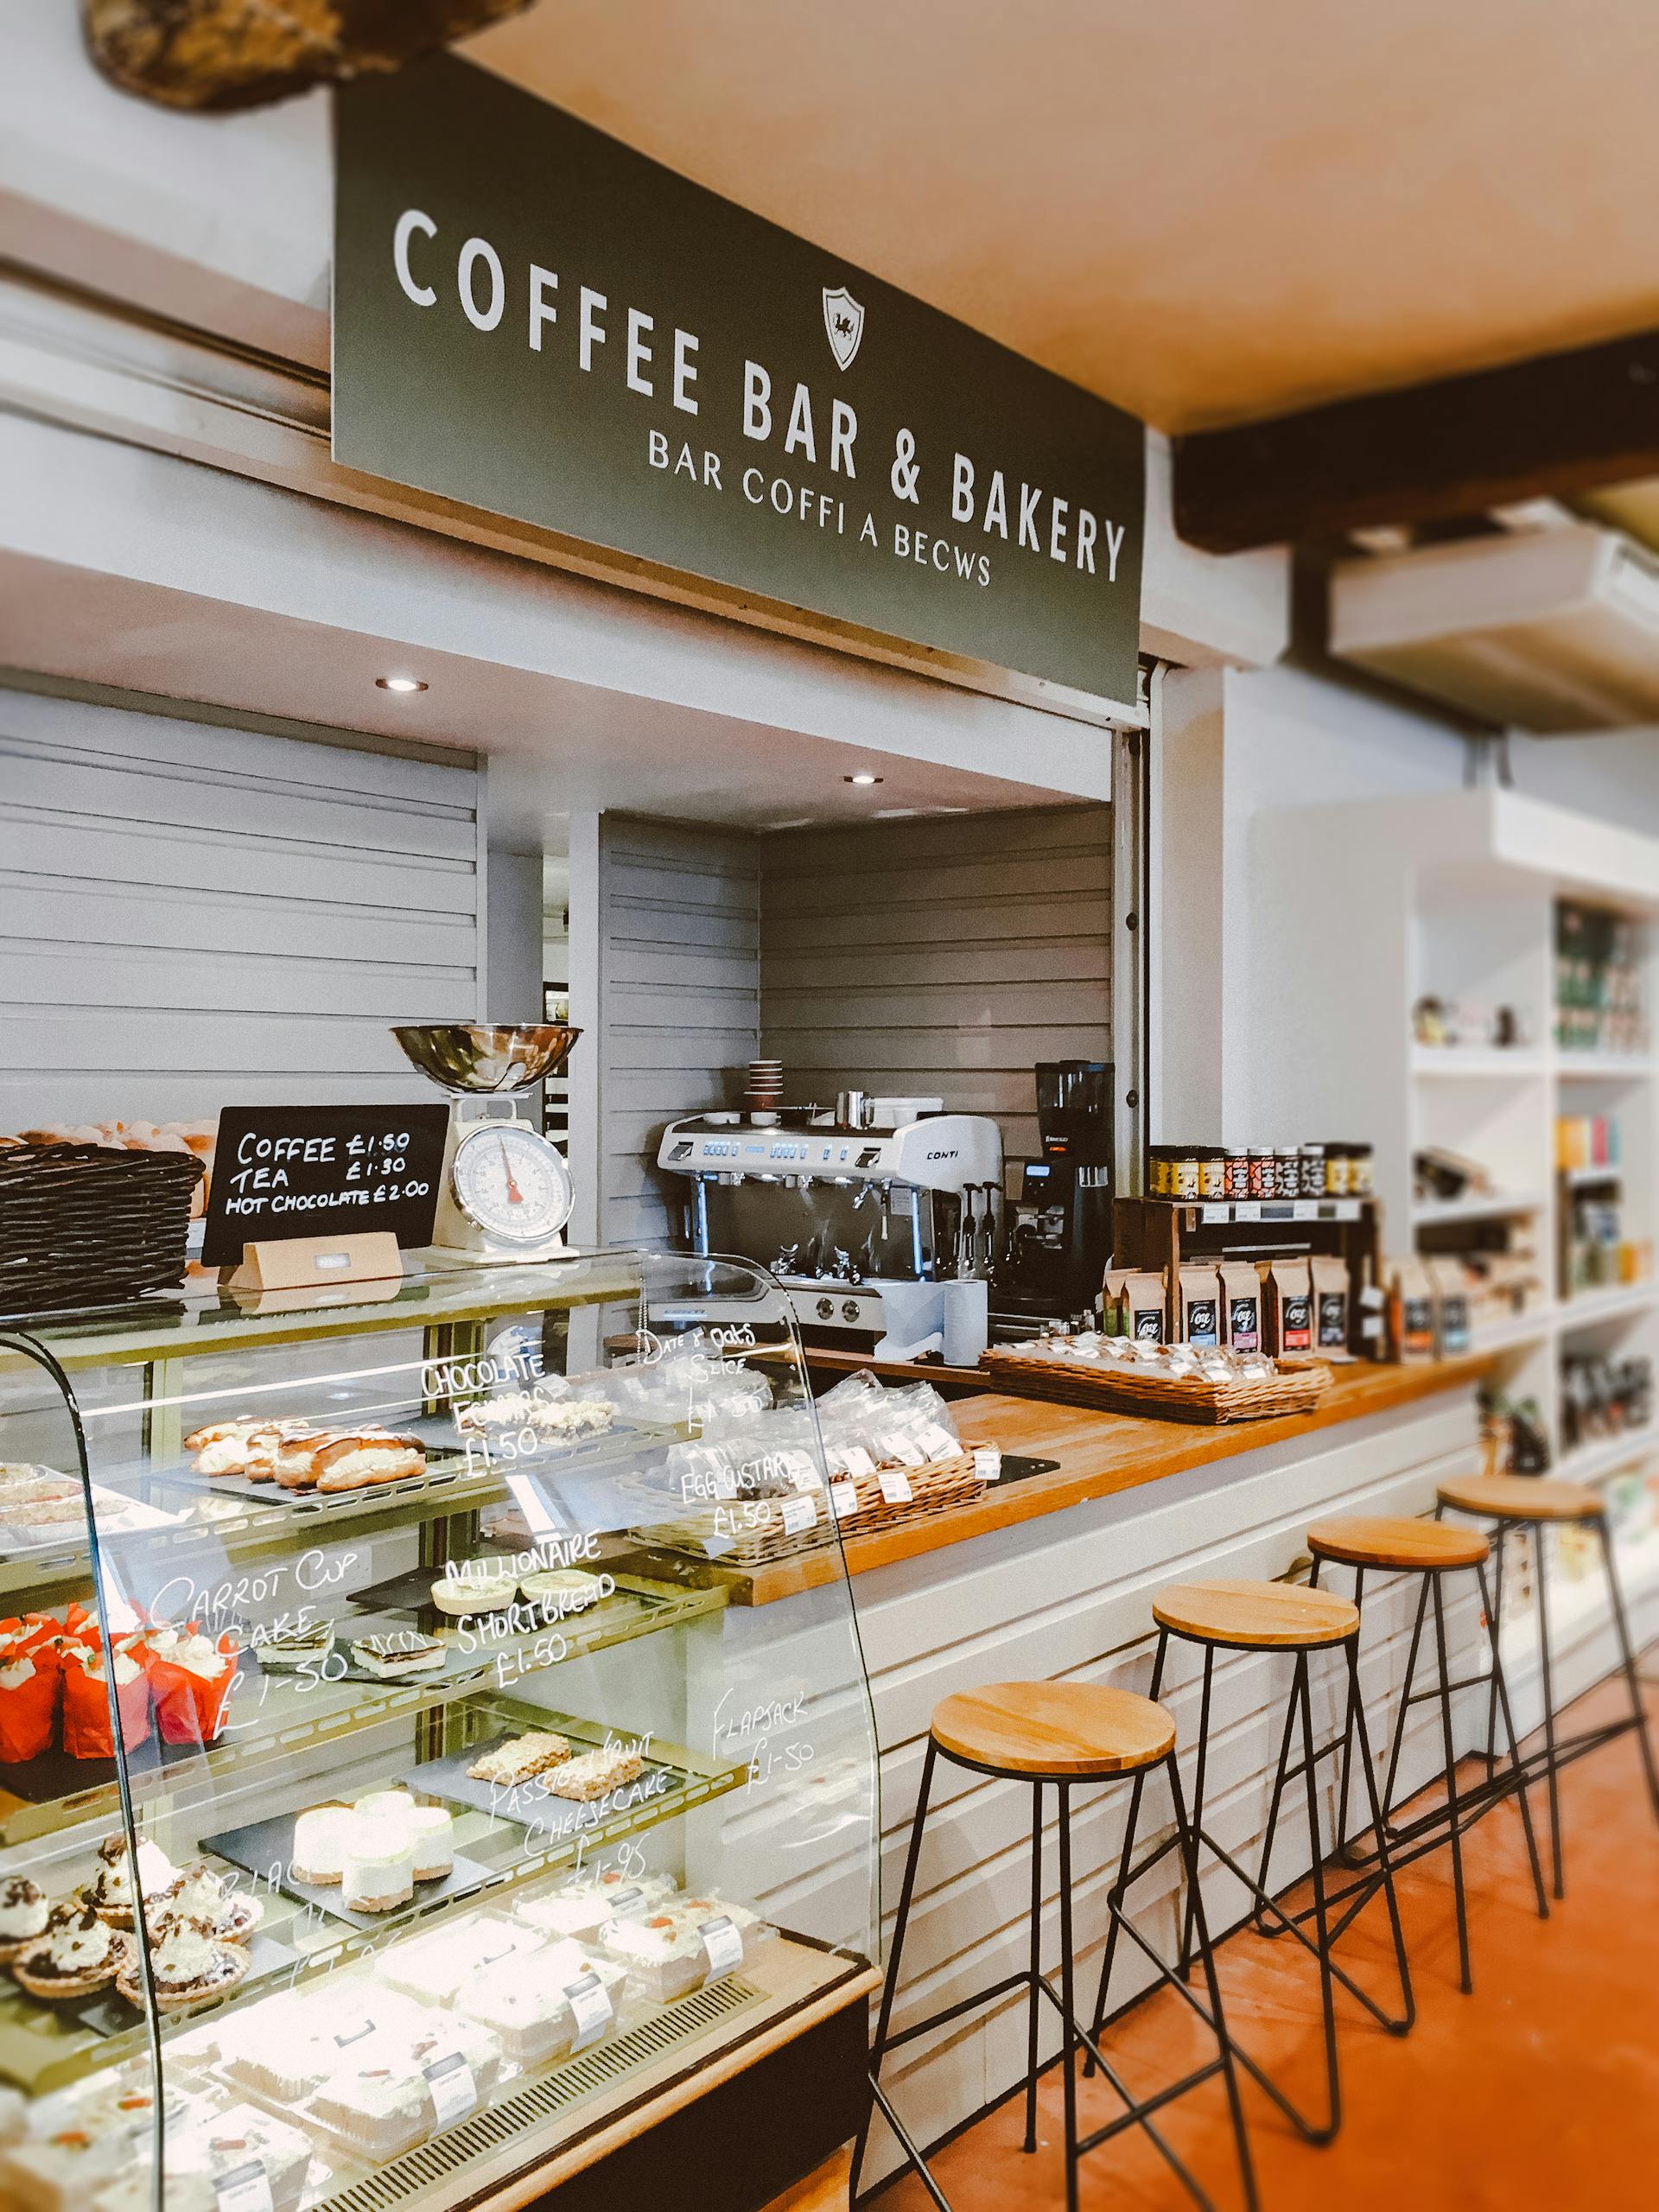 A coffee bar and bakery | Source: Pexels